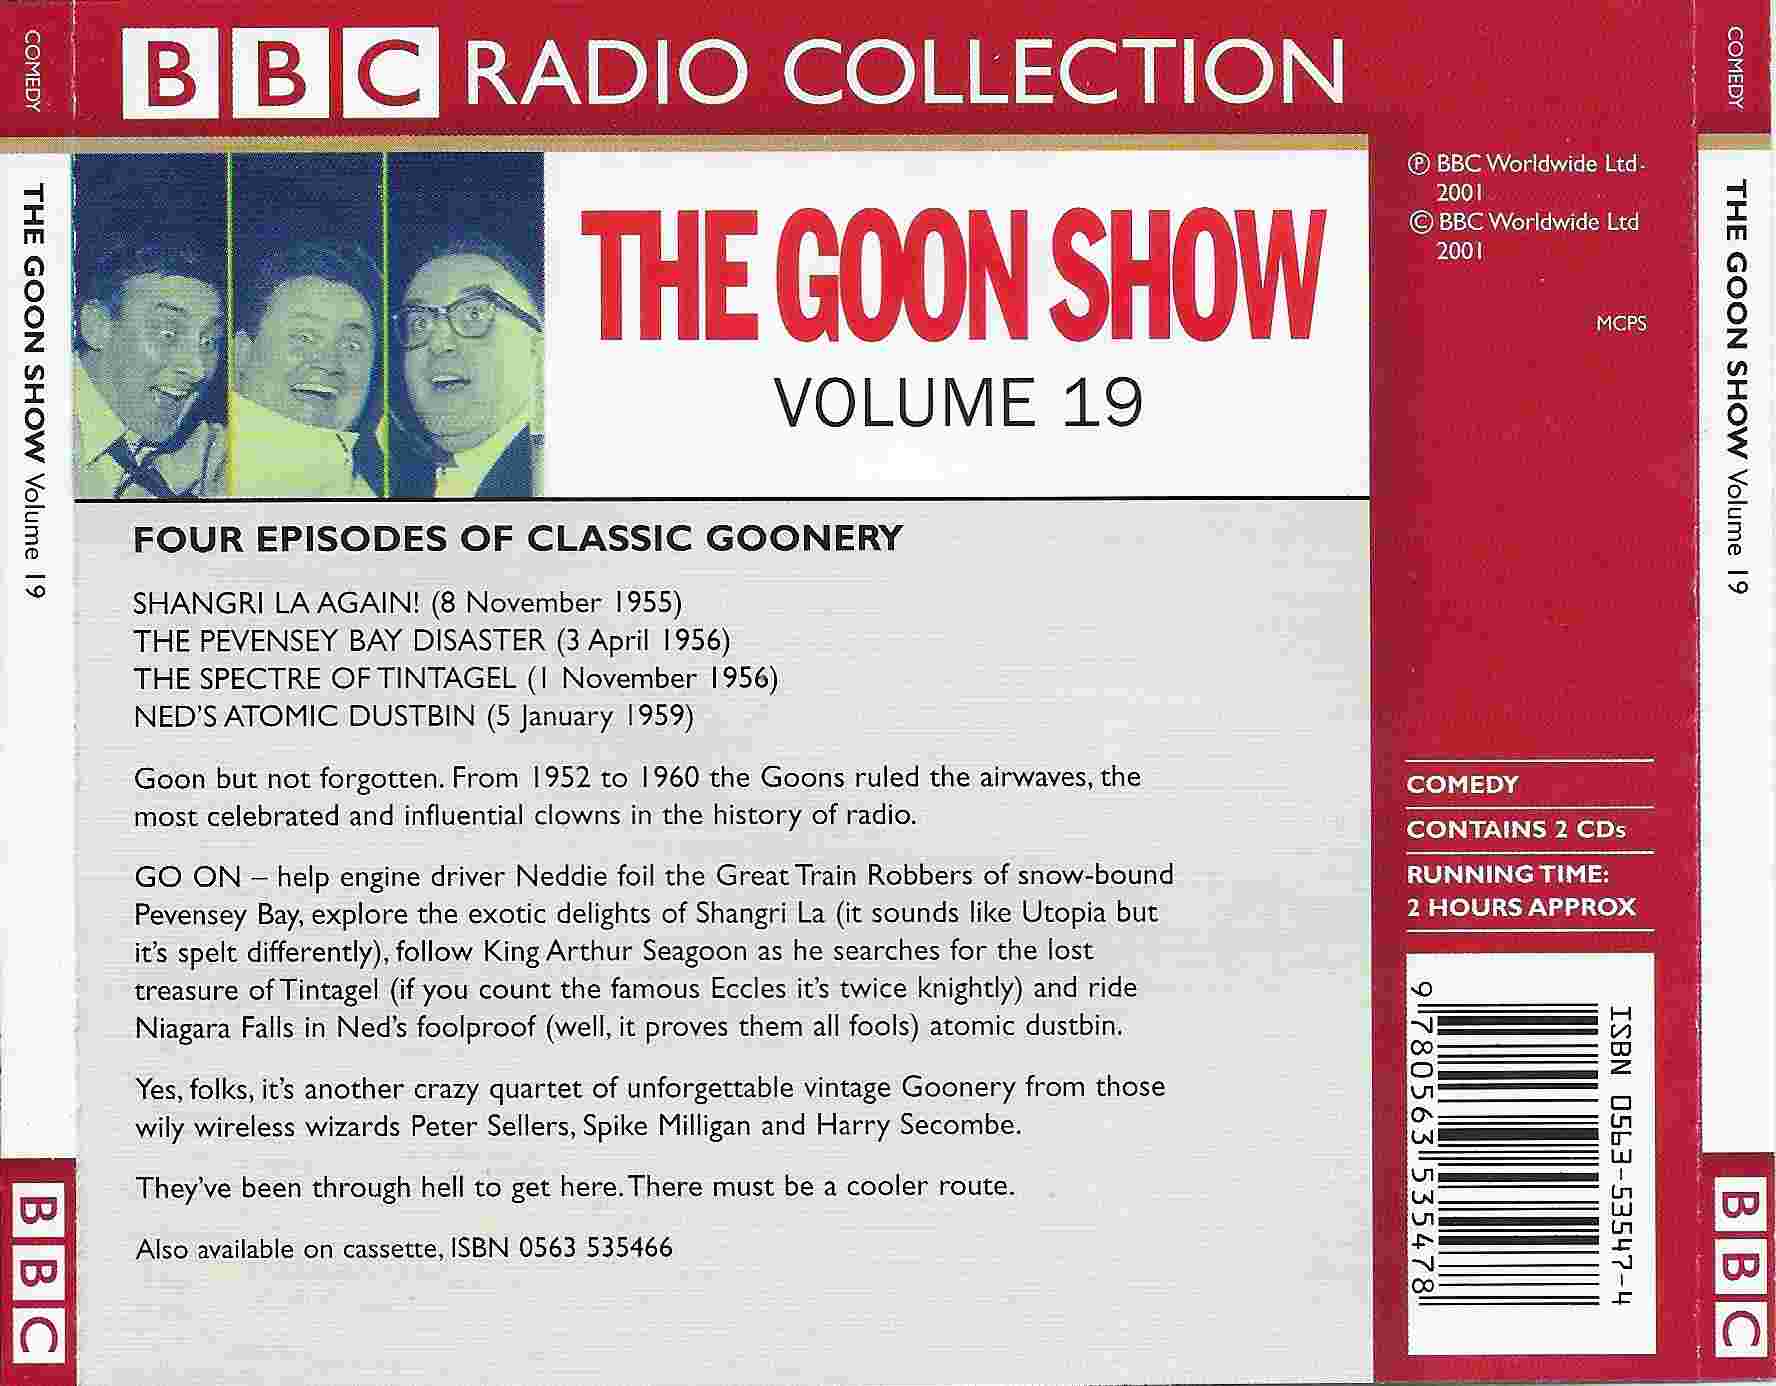 Picture of ISBN 0-563-53547-4 The Goon show 19 - Ned's atomic dustbin by artist Spike Milligan / Larry Stephens from the BBC records and Tapes library